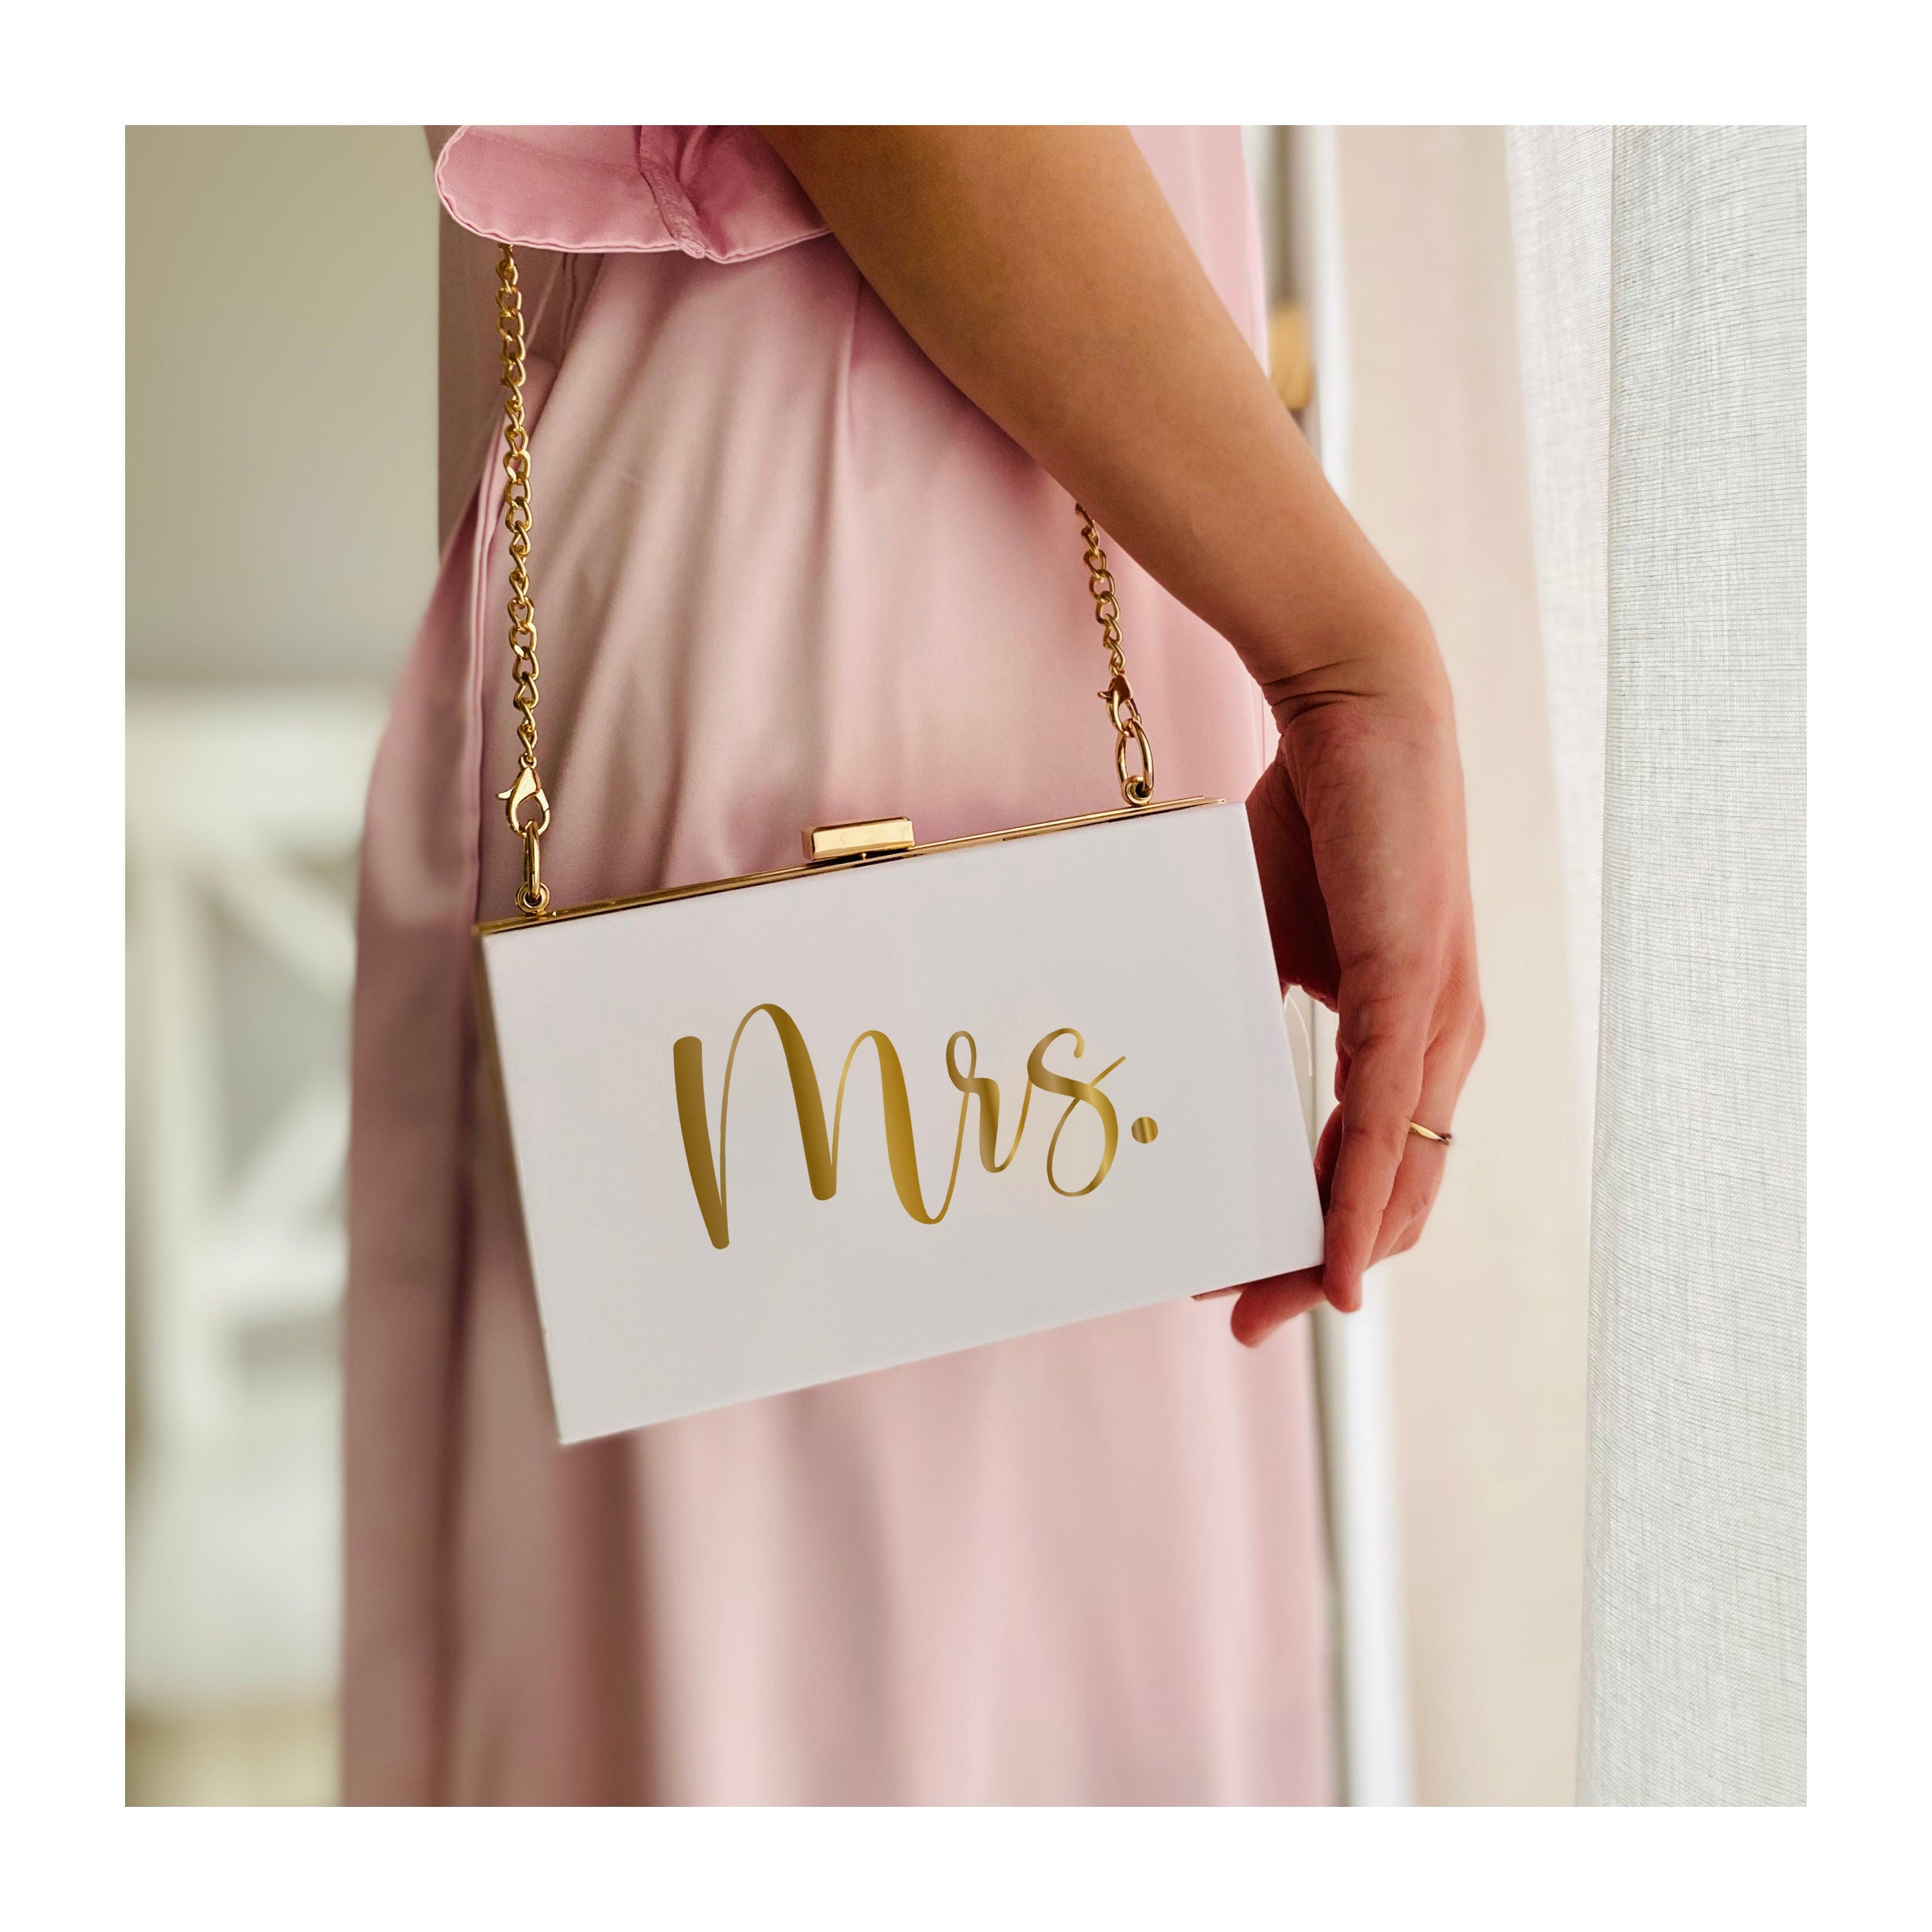 Mrs. Clutch Gift for Bride to Be, Future Mrs Wedding day accessory, Bride Purse